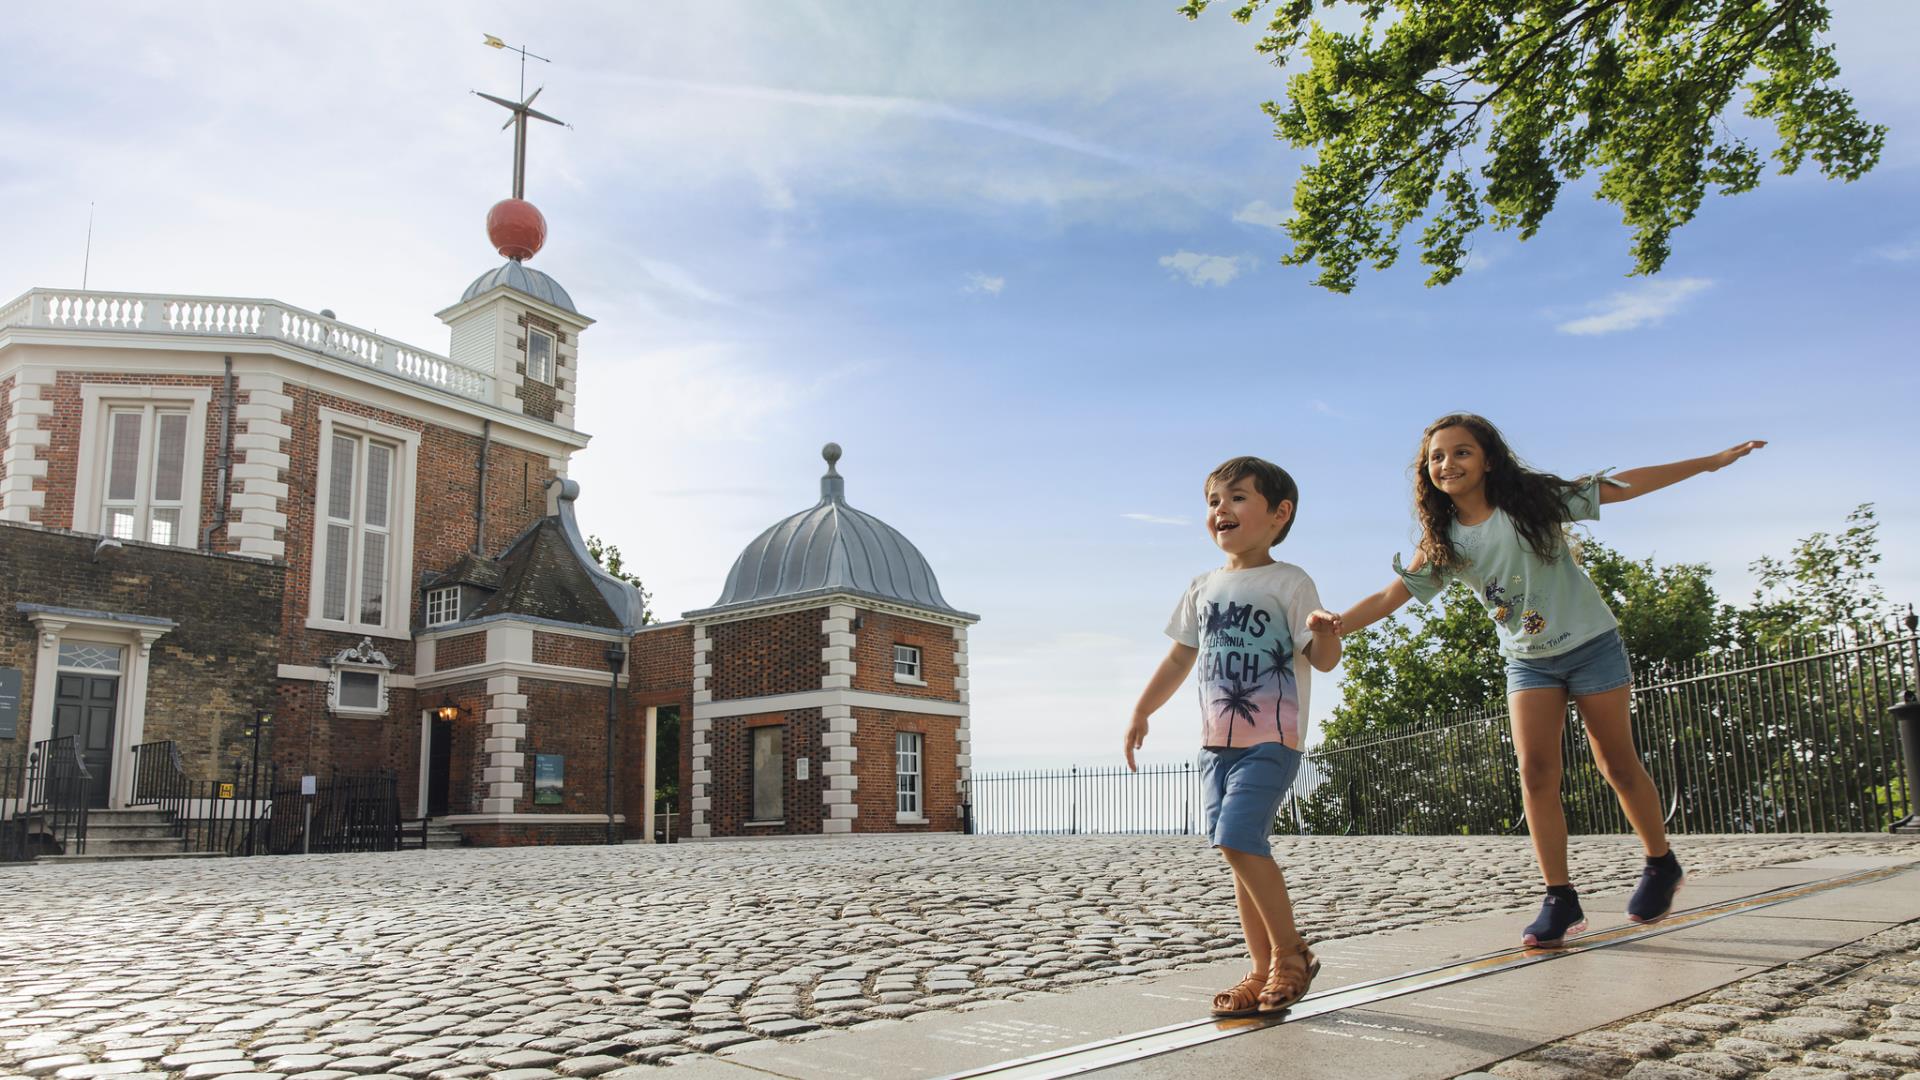 A boy and a girl walk along the Meridian Line in the courtyard of the Royal Observatory in Greenwich.